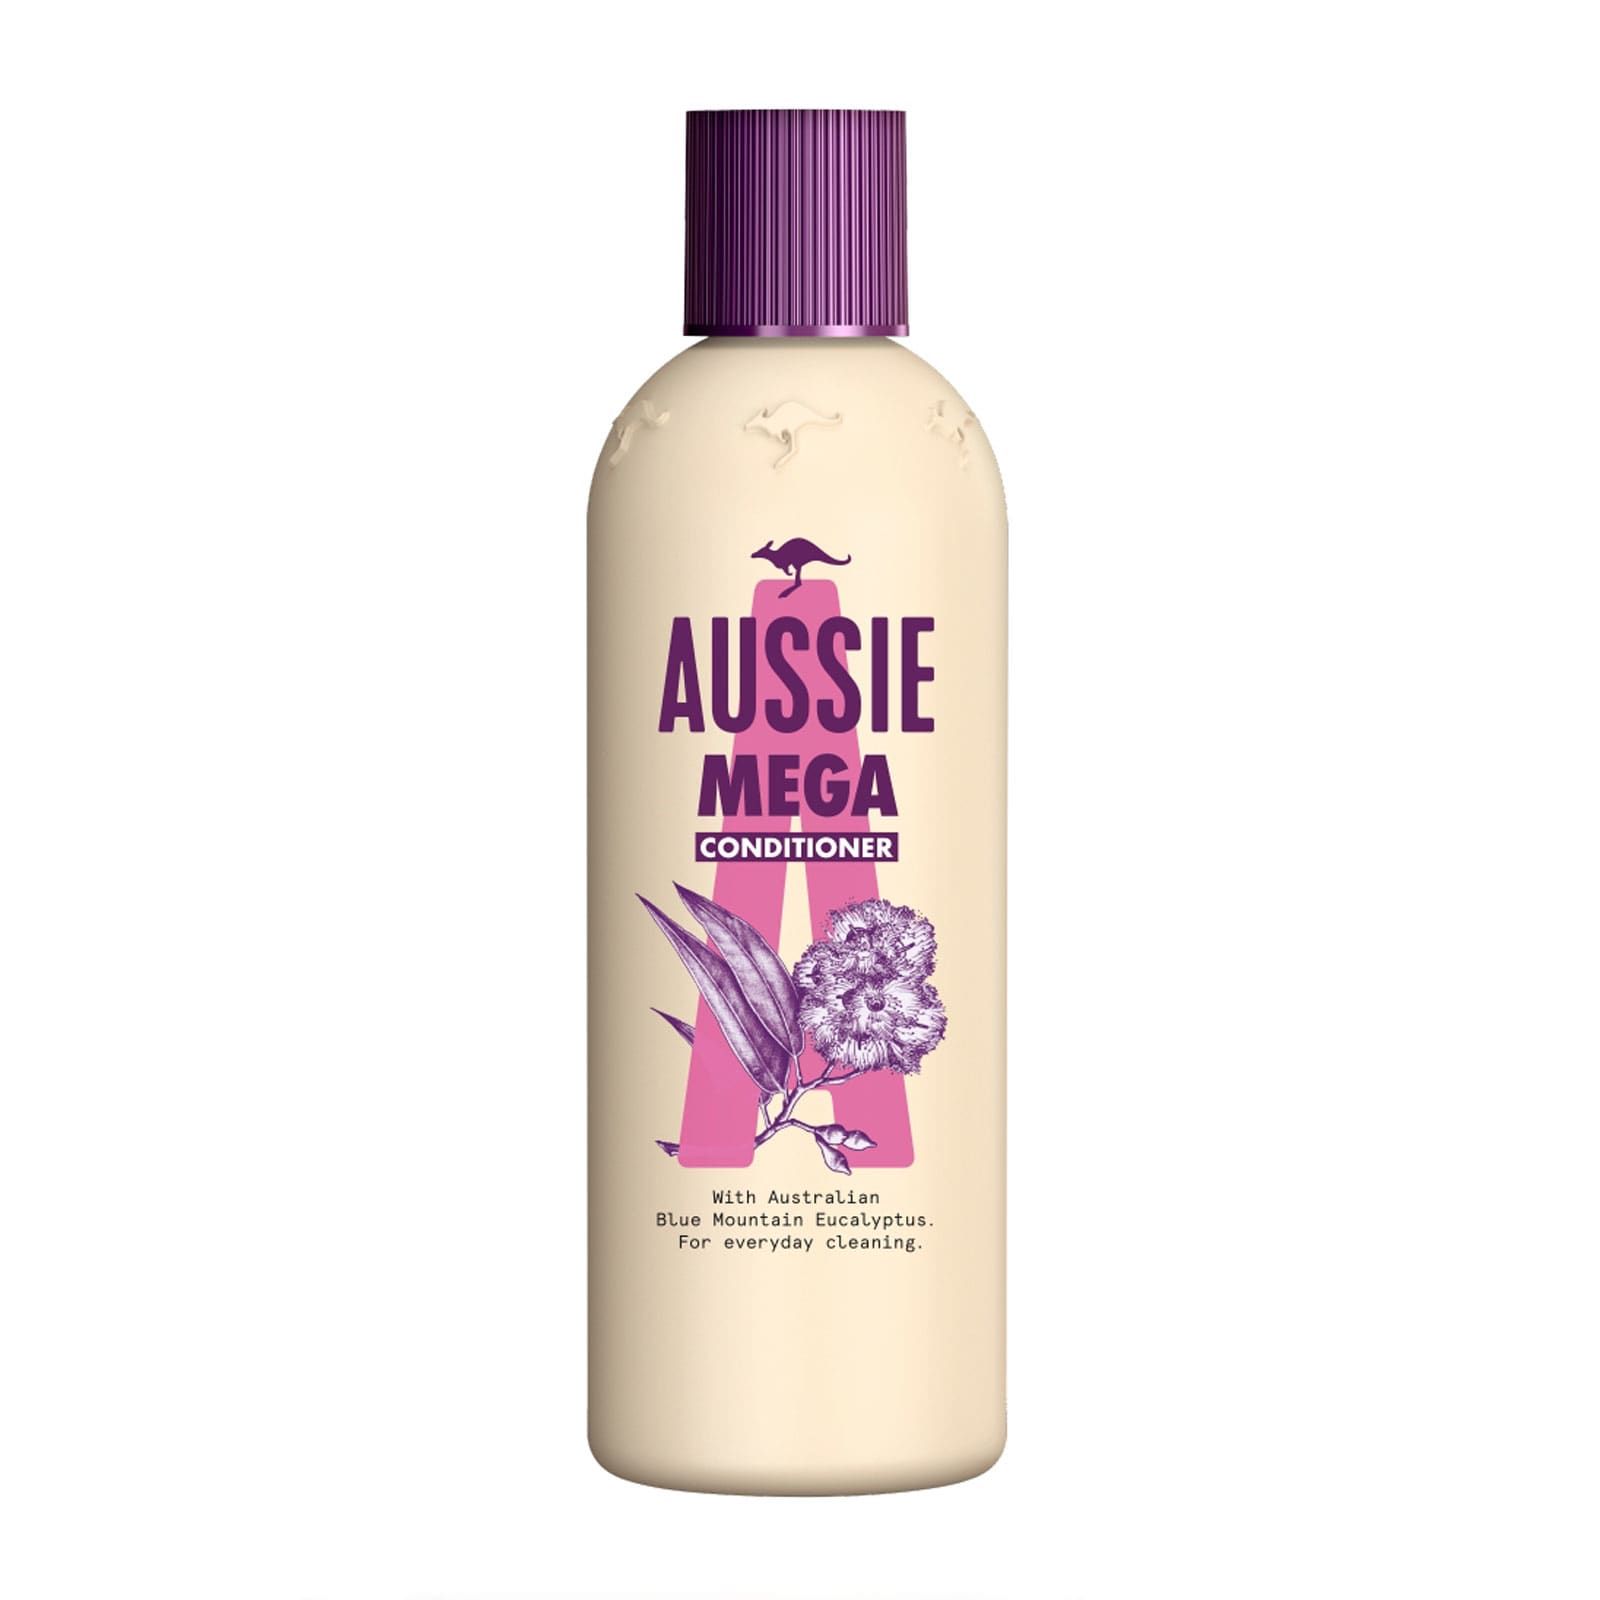 Aussie Mega Hair Conditioner for Daily Conditioning